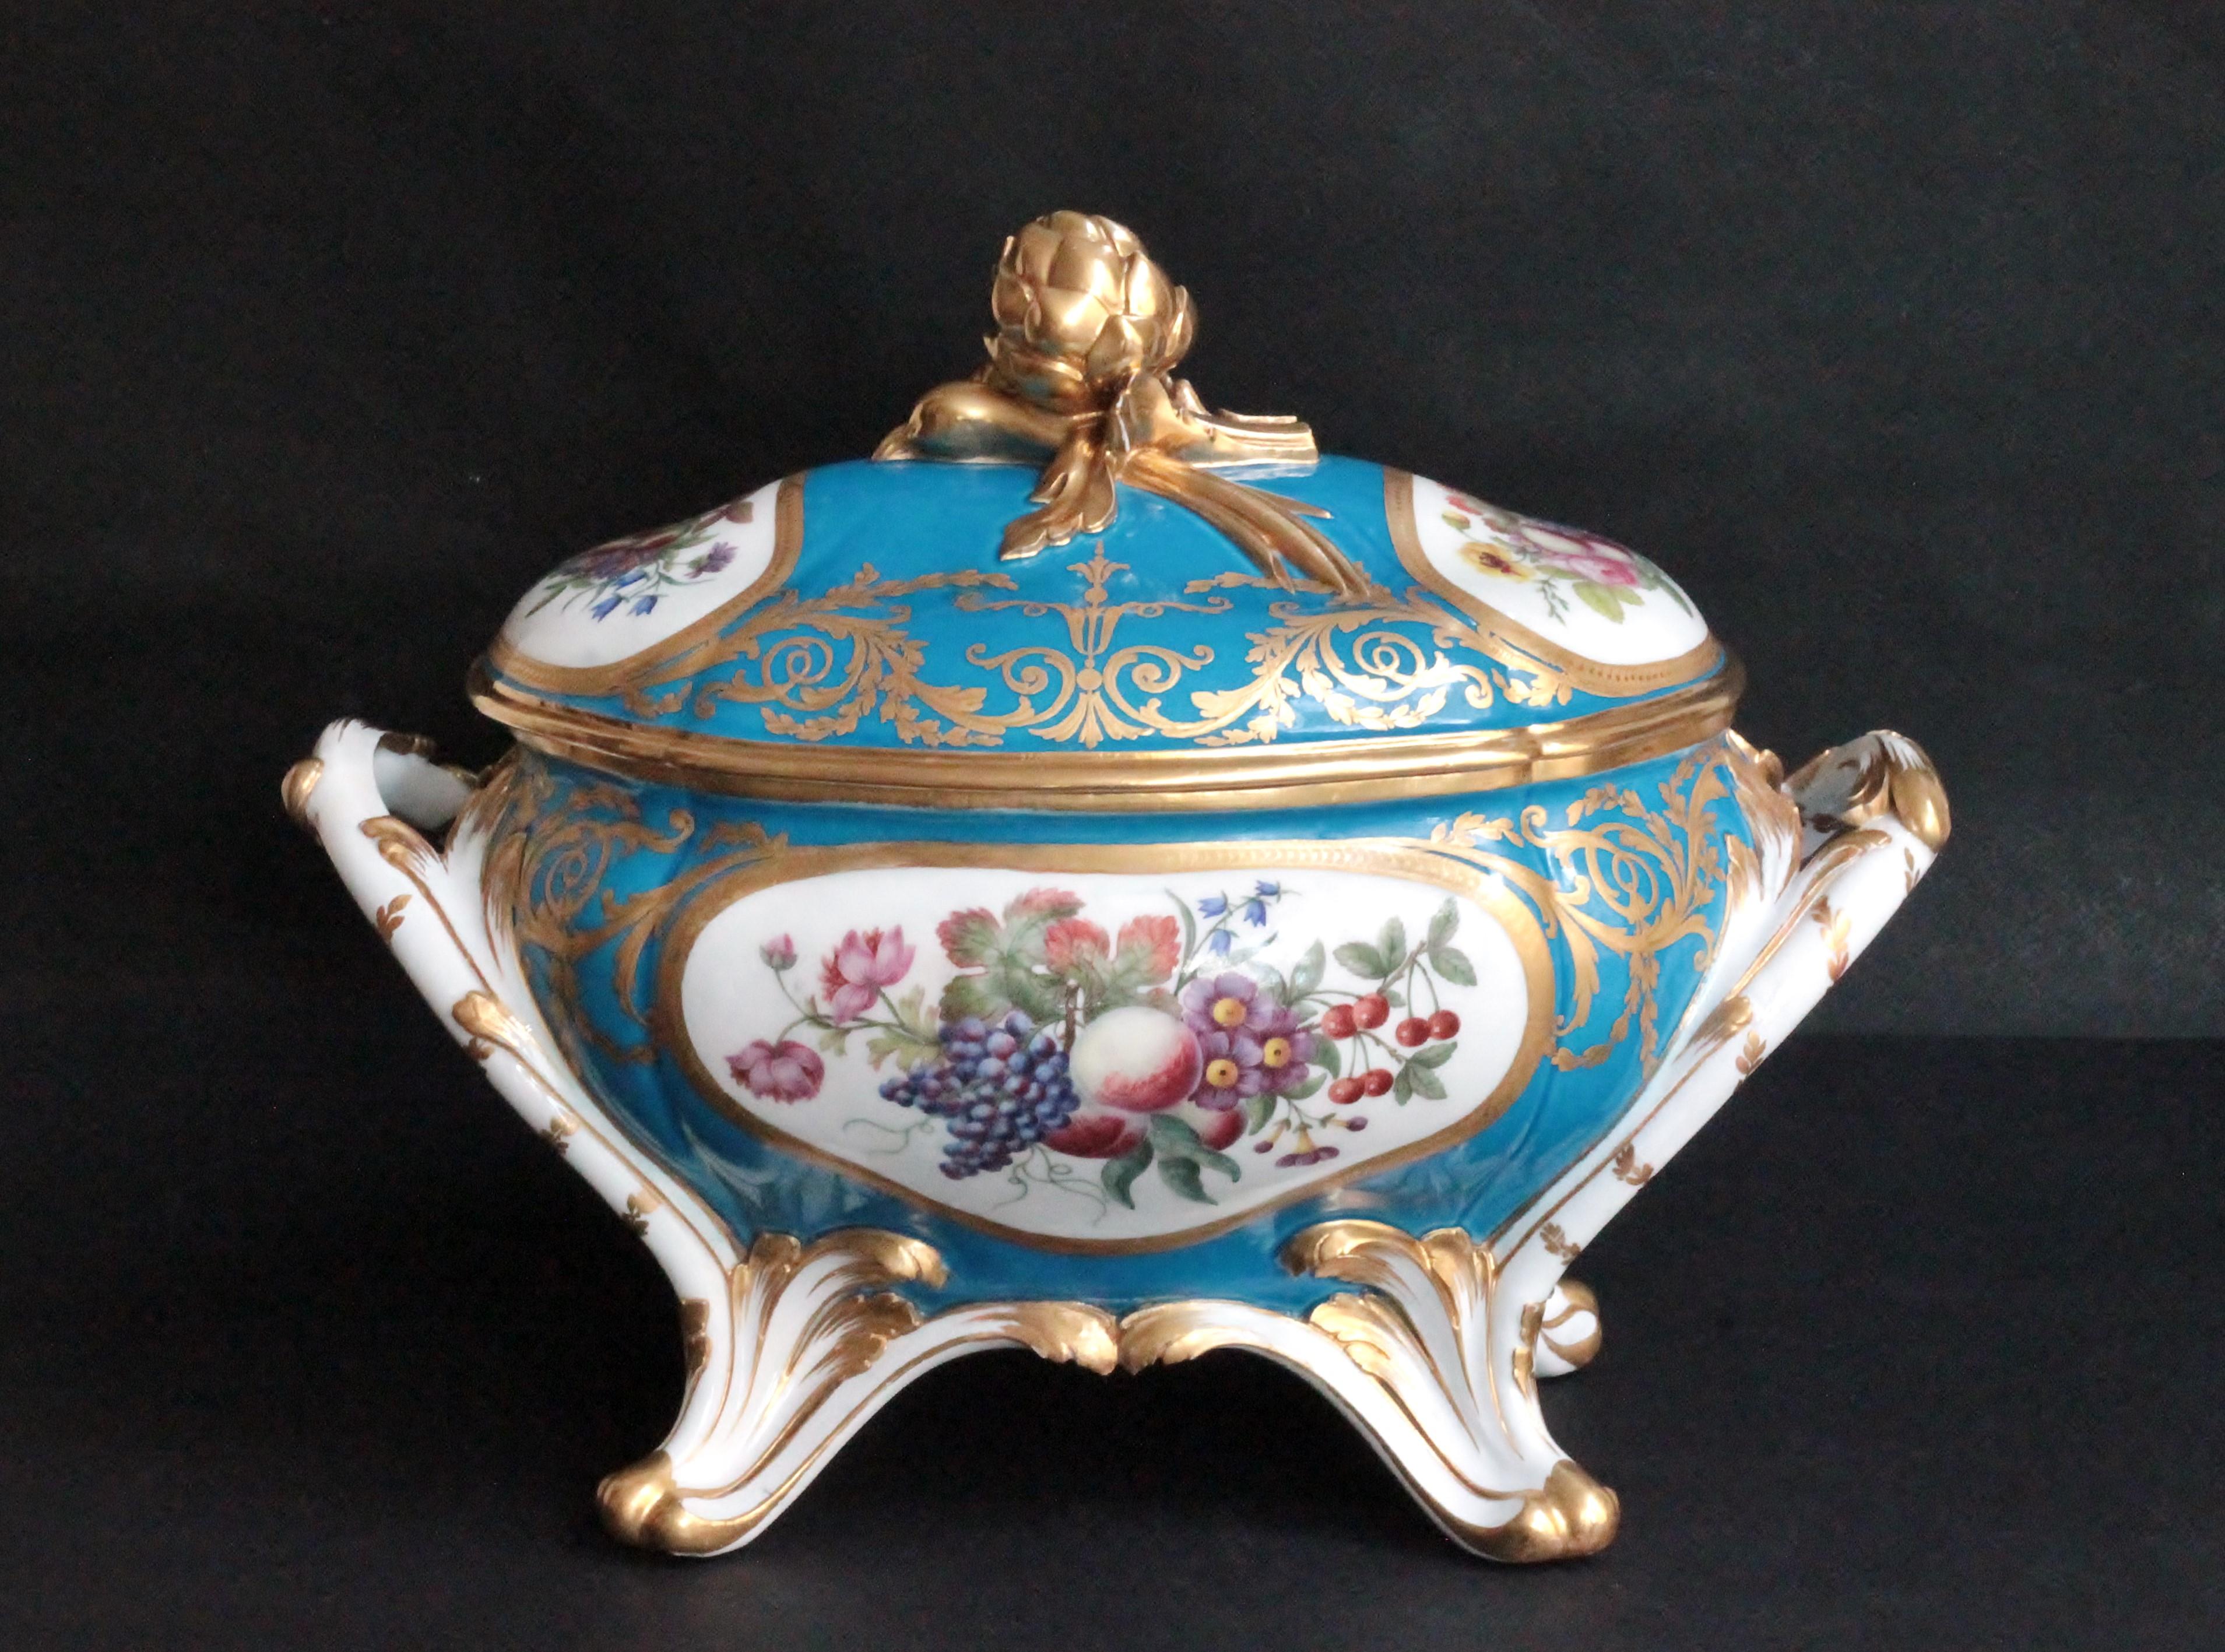 Oval tureen and cover of soft-paste Sevres porcelain, turquoise blue ground (bleu celeste) with gilded decoration. Bunches of flowers and fruit are painted in the four oval reserves on the tureen and cover. Linking the reserves are gilded arabesques